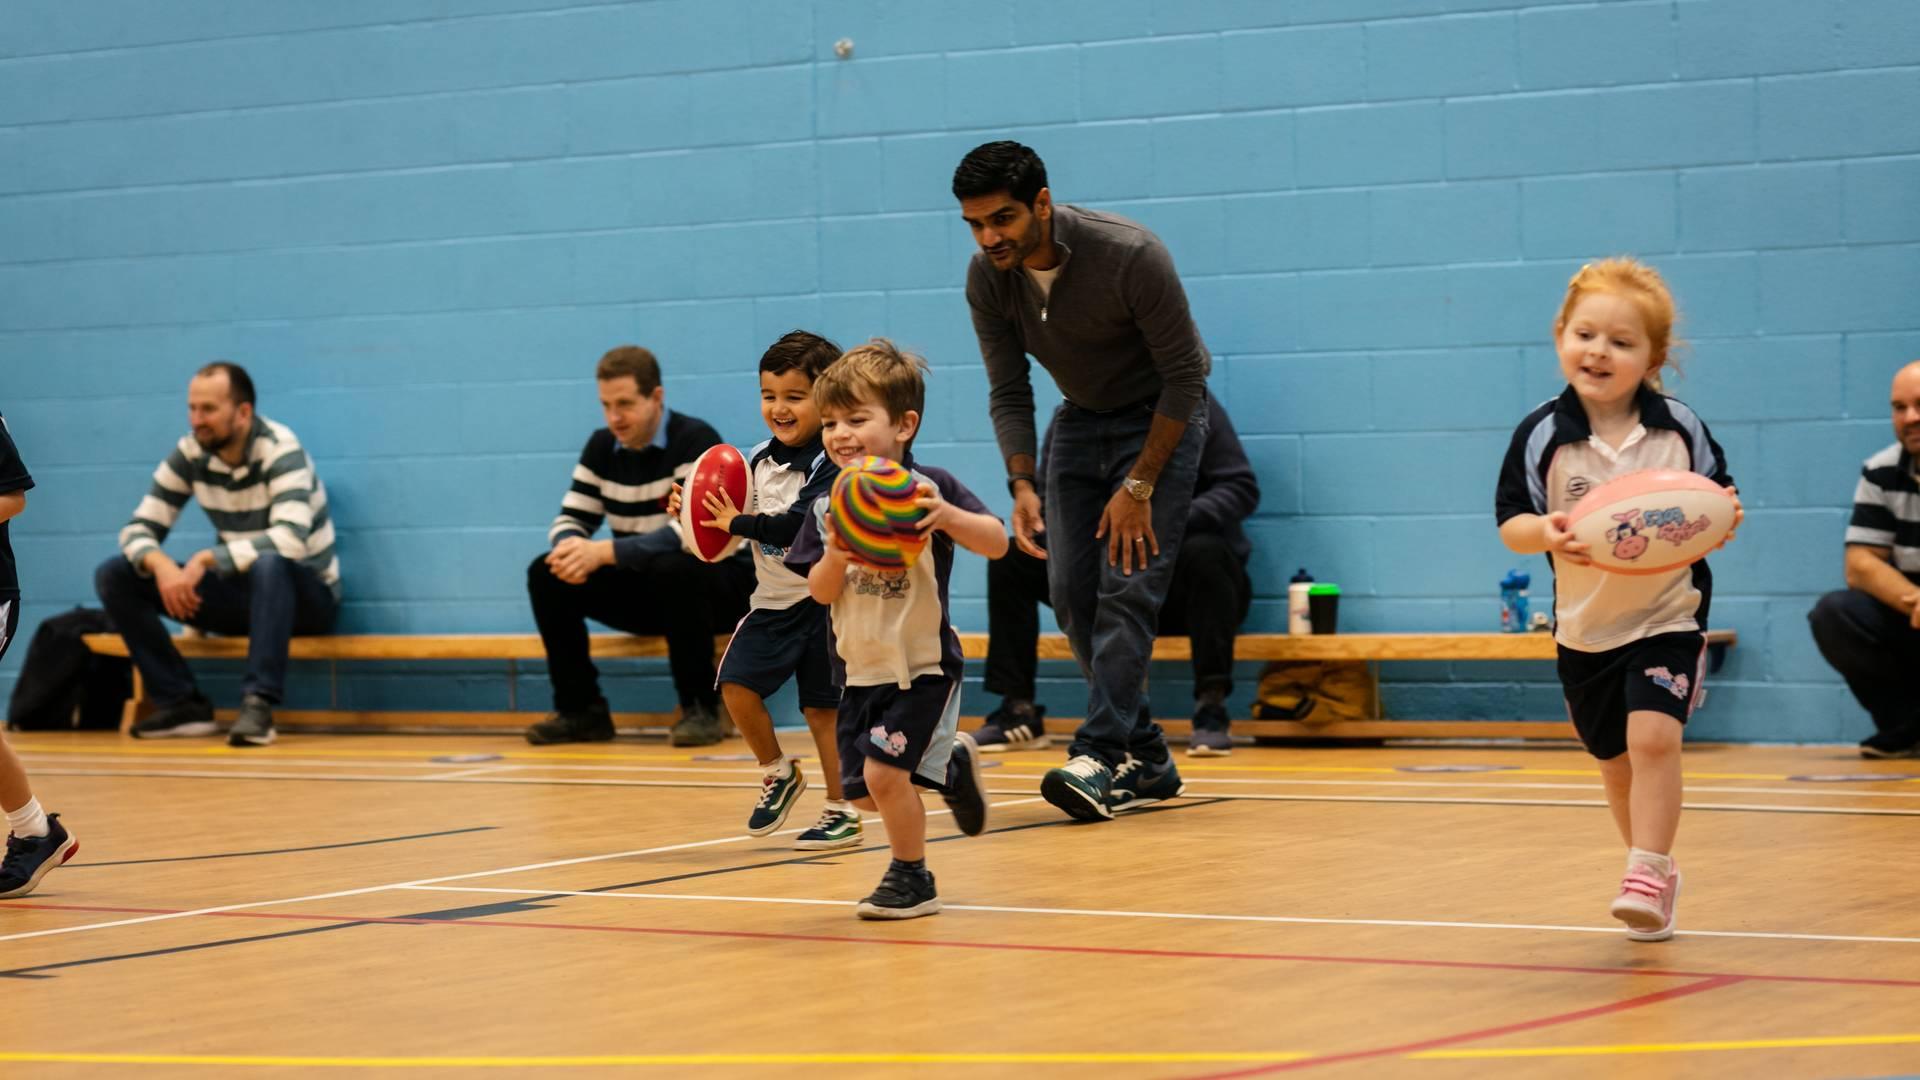 Rugbytots @ Primley Wood Primary School, LS17. Saturday and Sunday photo